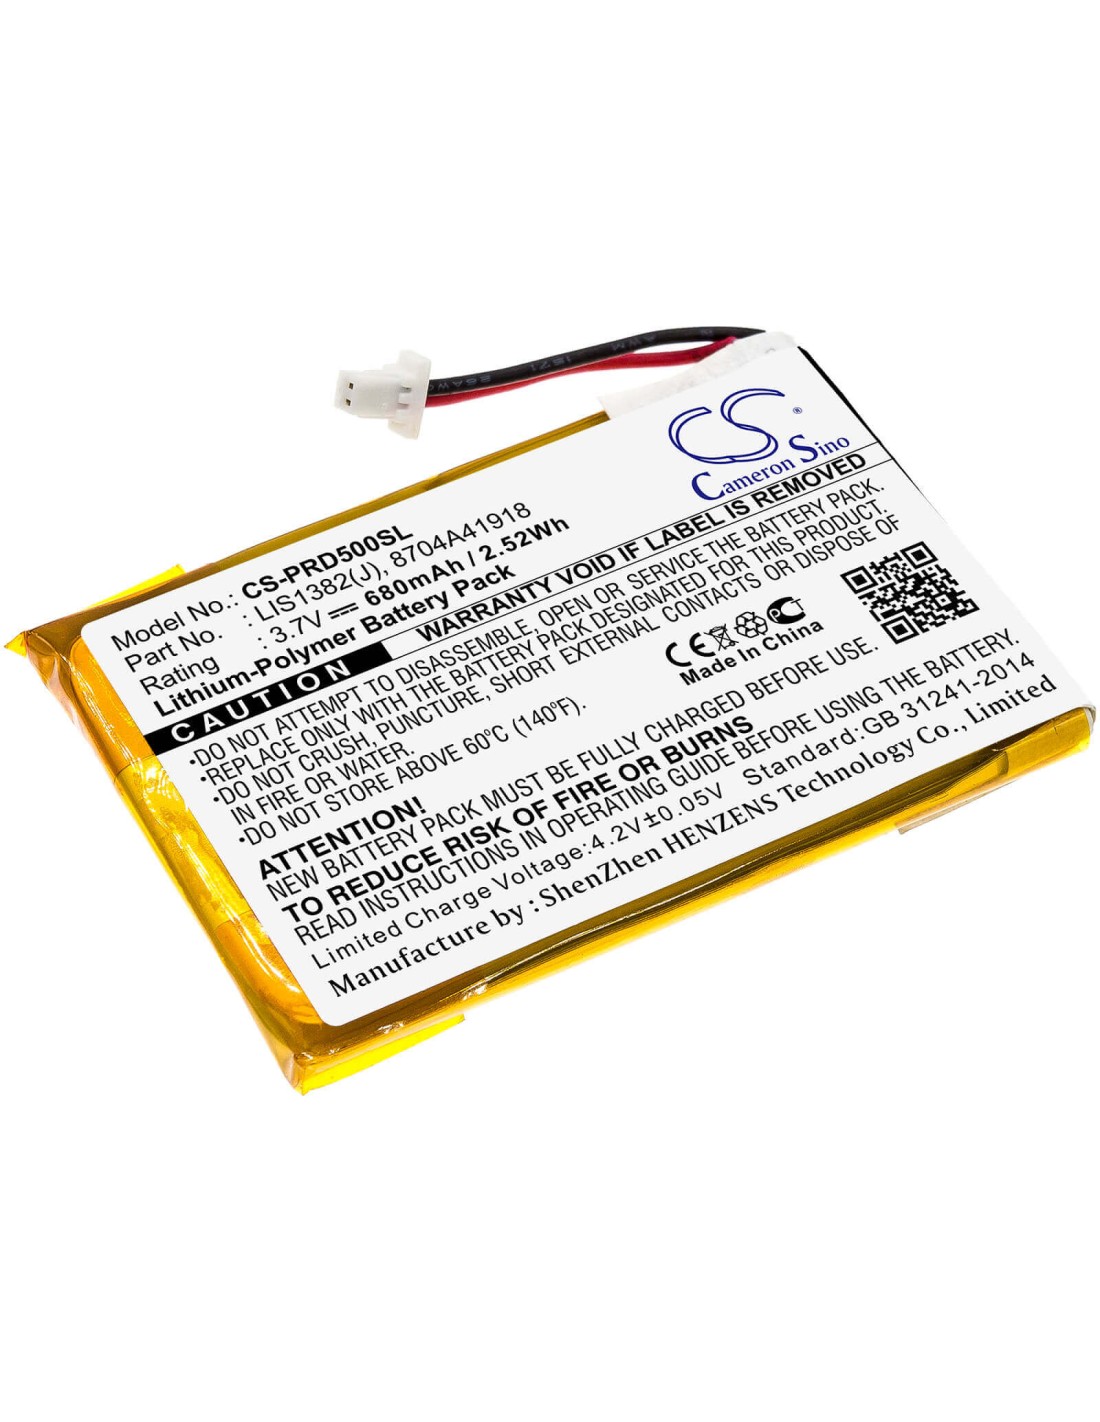 Battery for Sony Portable Reader Prs-500, Portable Reader Prs-505, Portable Reader Prs-505sc/jp 3.7V, 750mAh - 2.78Wh